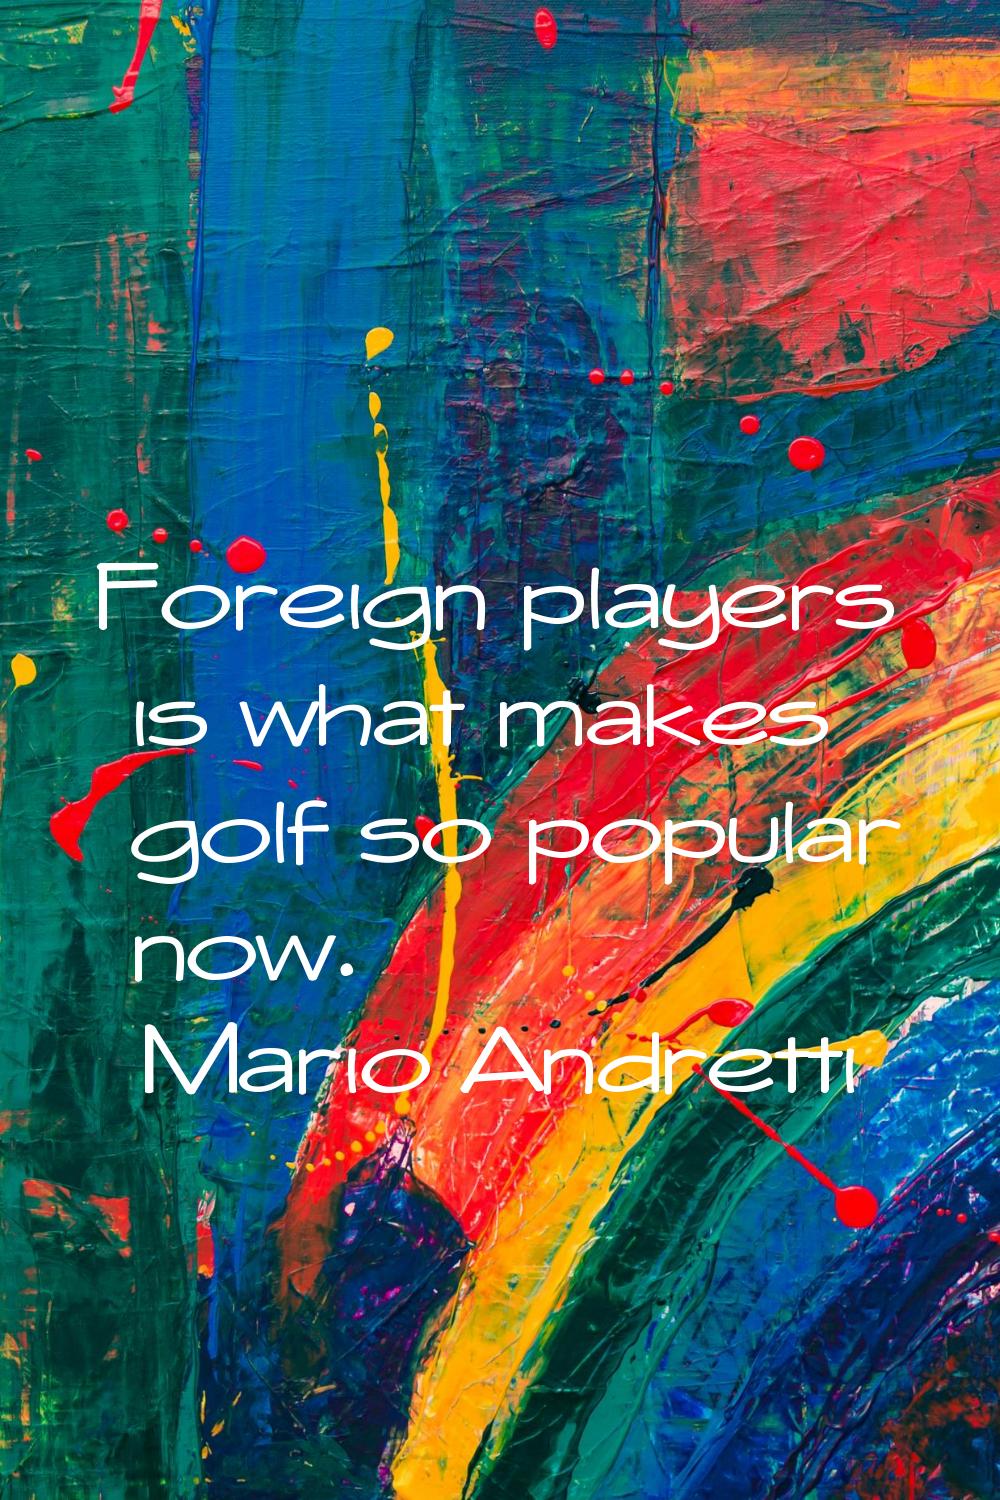 Foreign players is what makes golf so popular now.